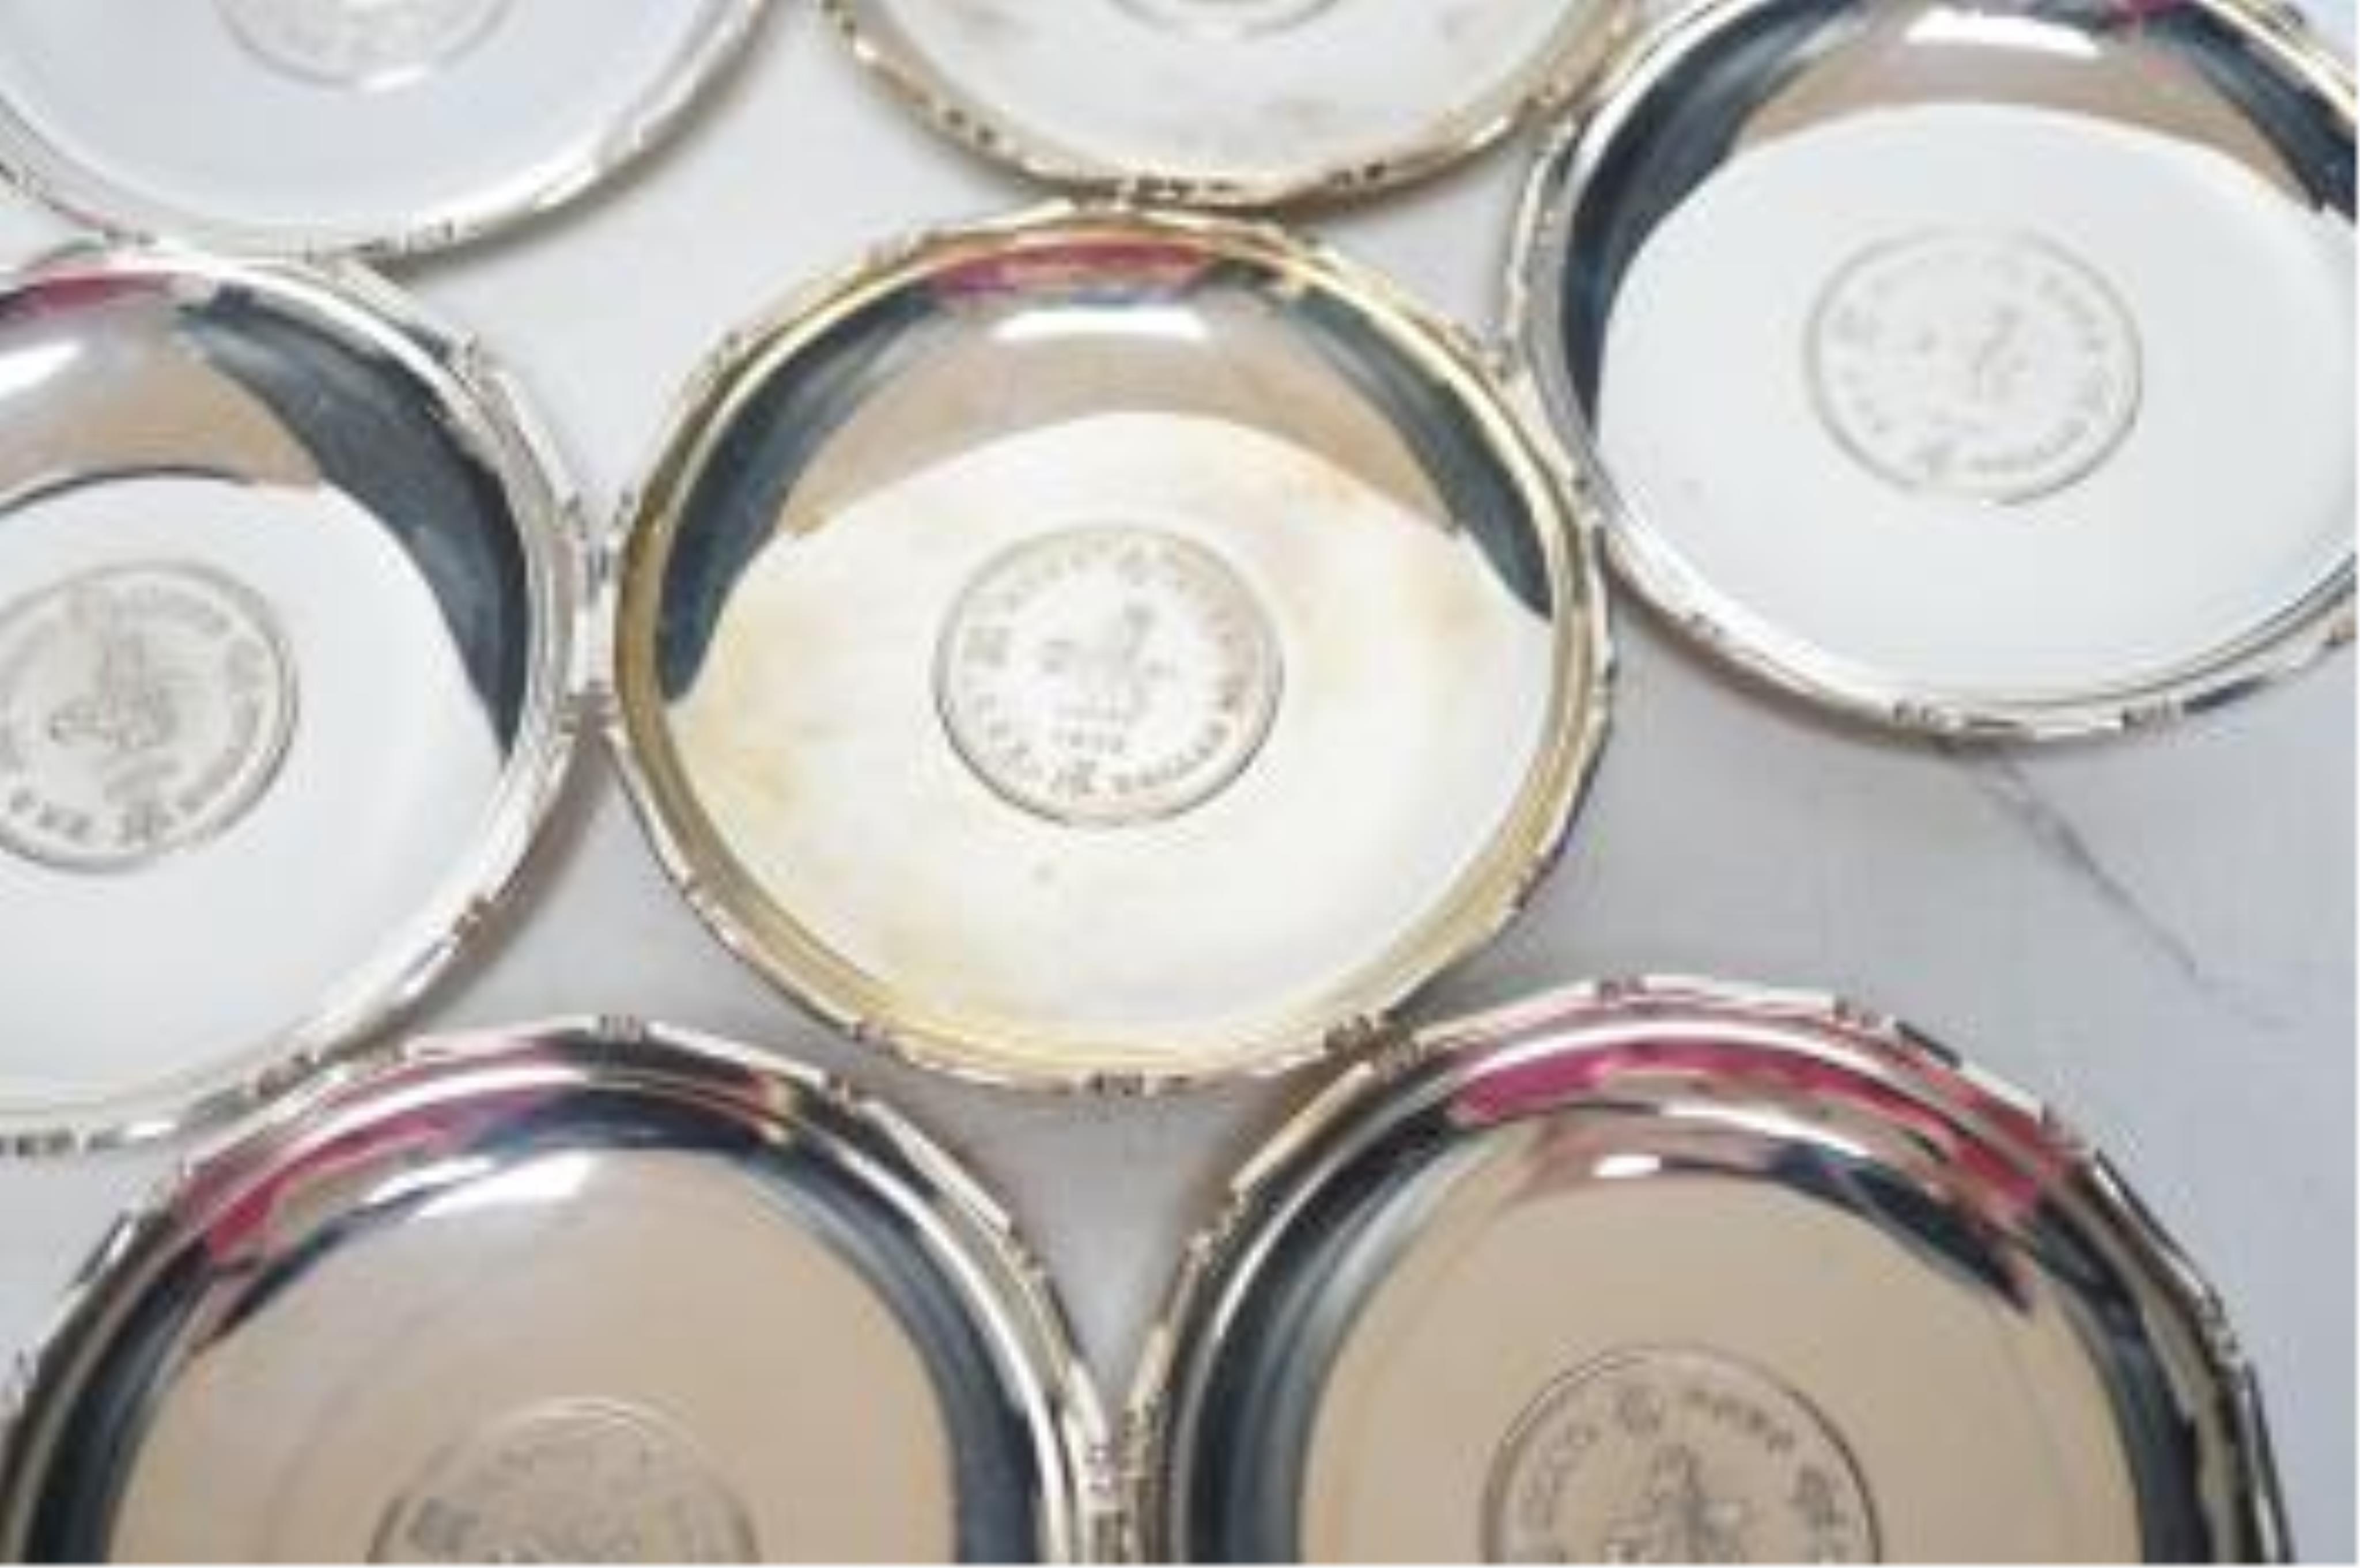 A set of seven Hong Kong sterling small dishes with inset coin, signed 'Sammy', diameter 86mm, gross weight 10.2oz. Good condition.